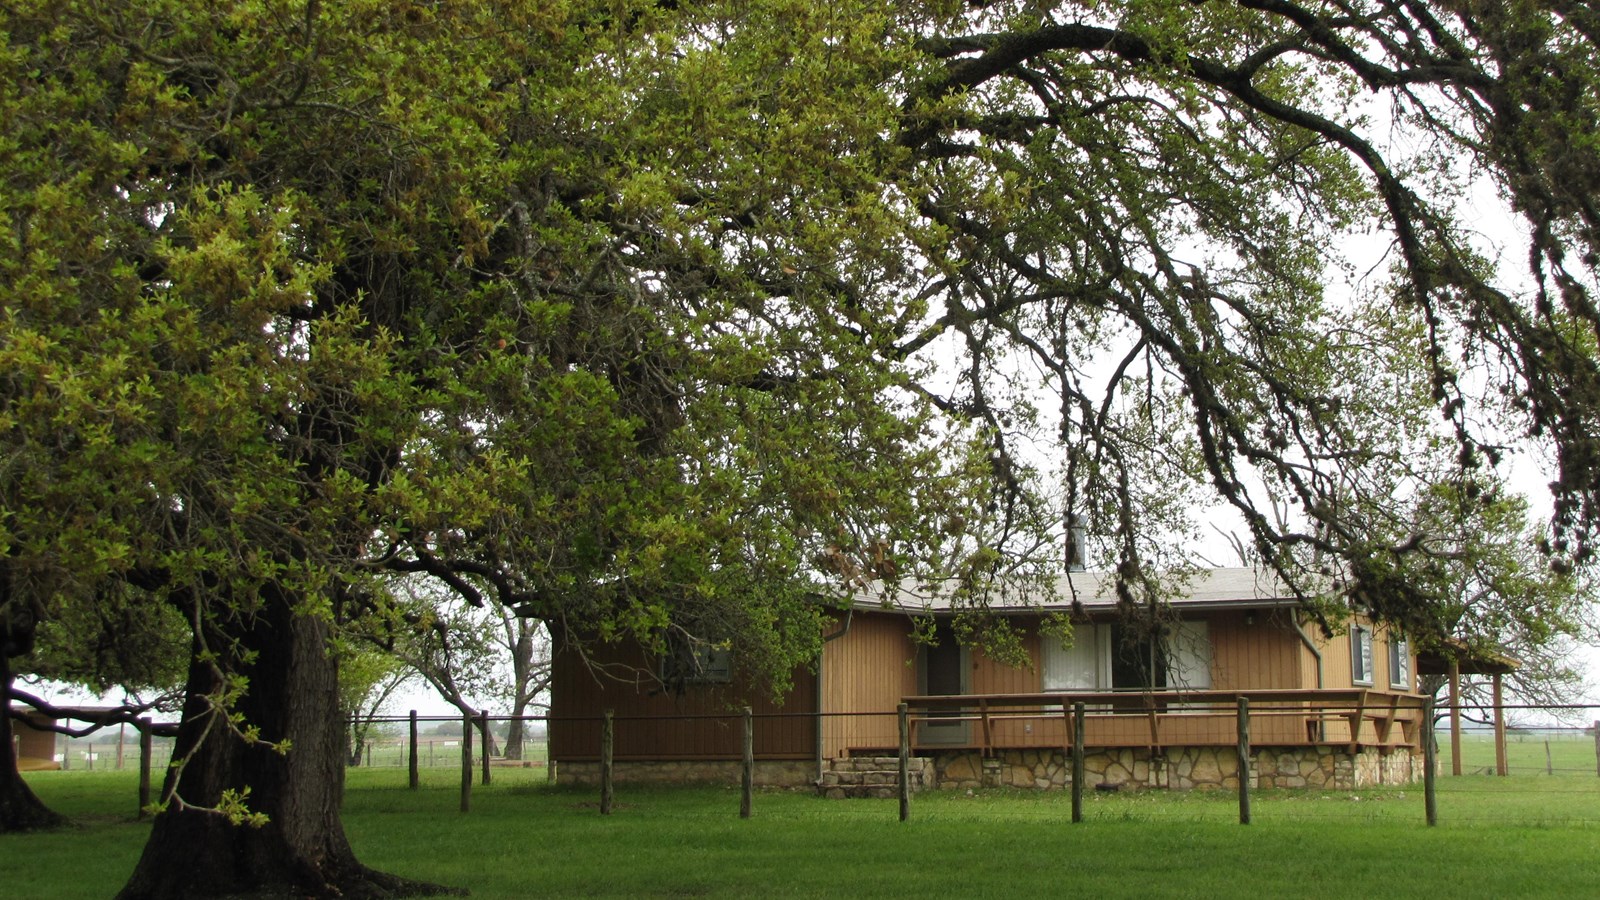 In the distance past a large live oak, there is a tan-colored ranch guesthouse with a fenced deck.